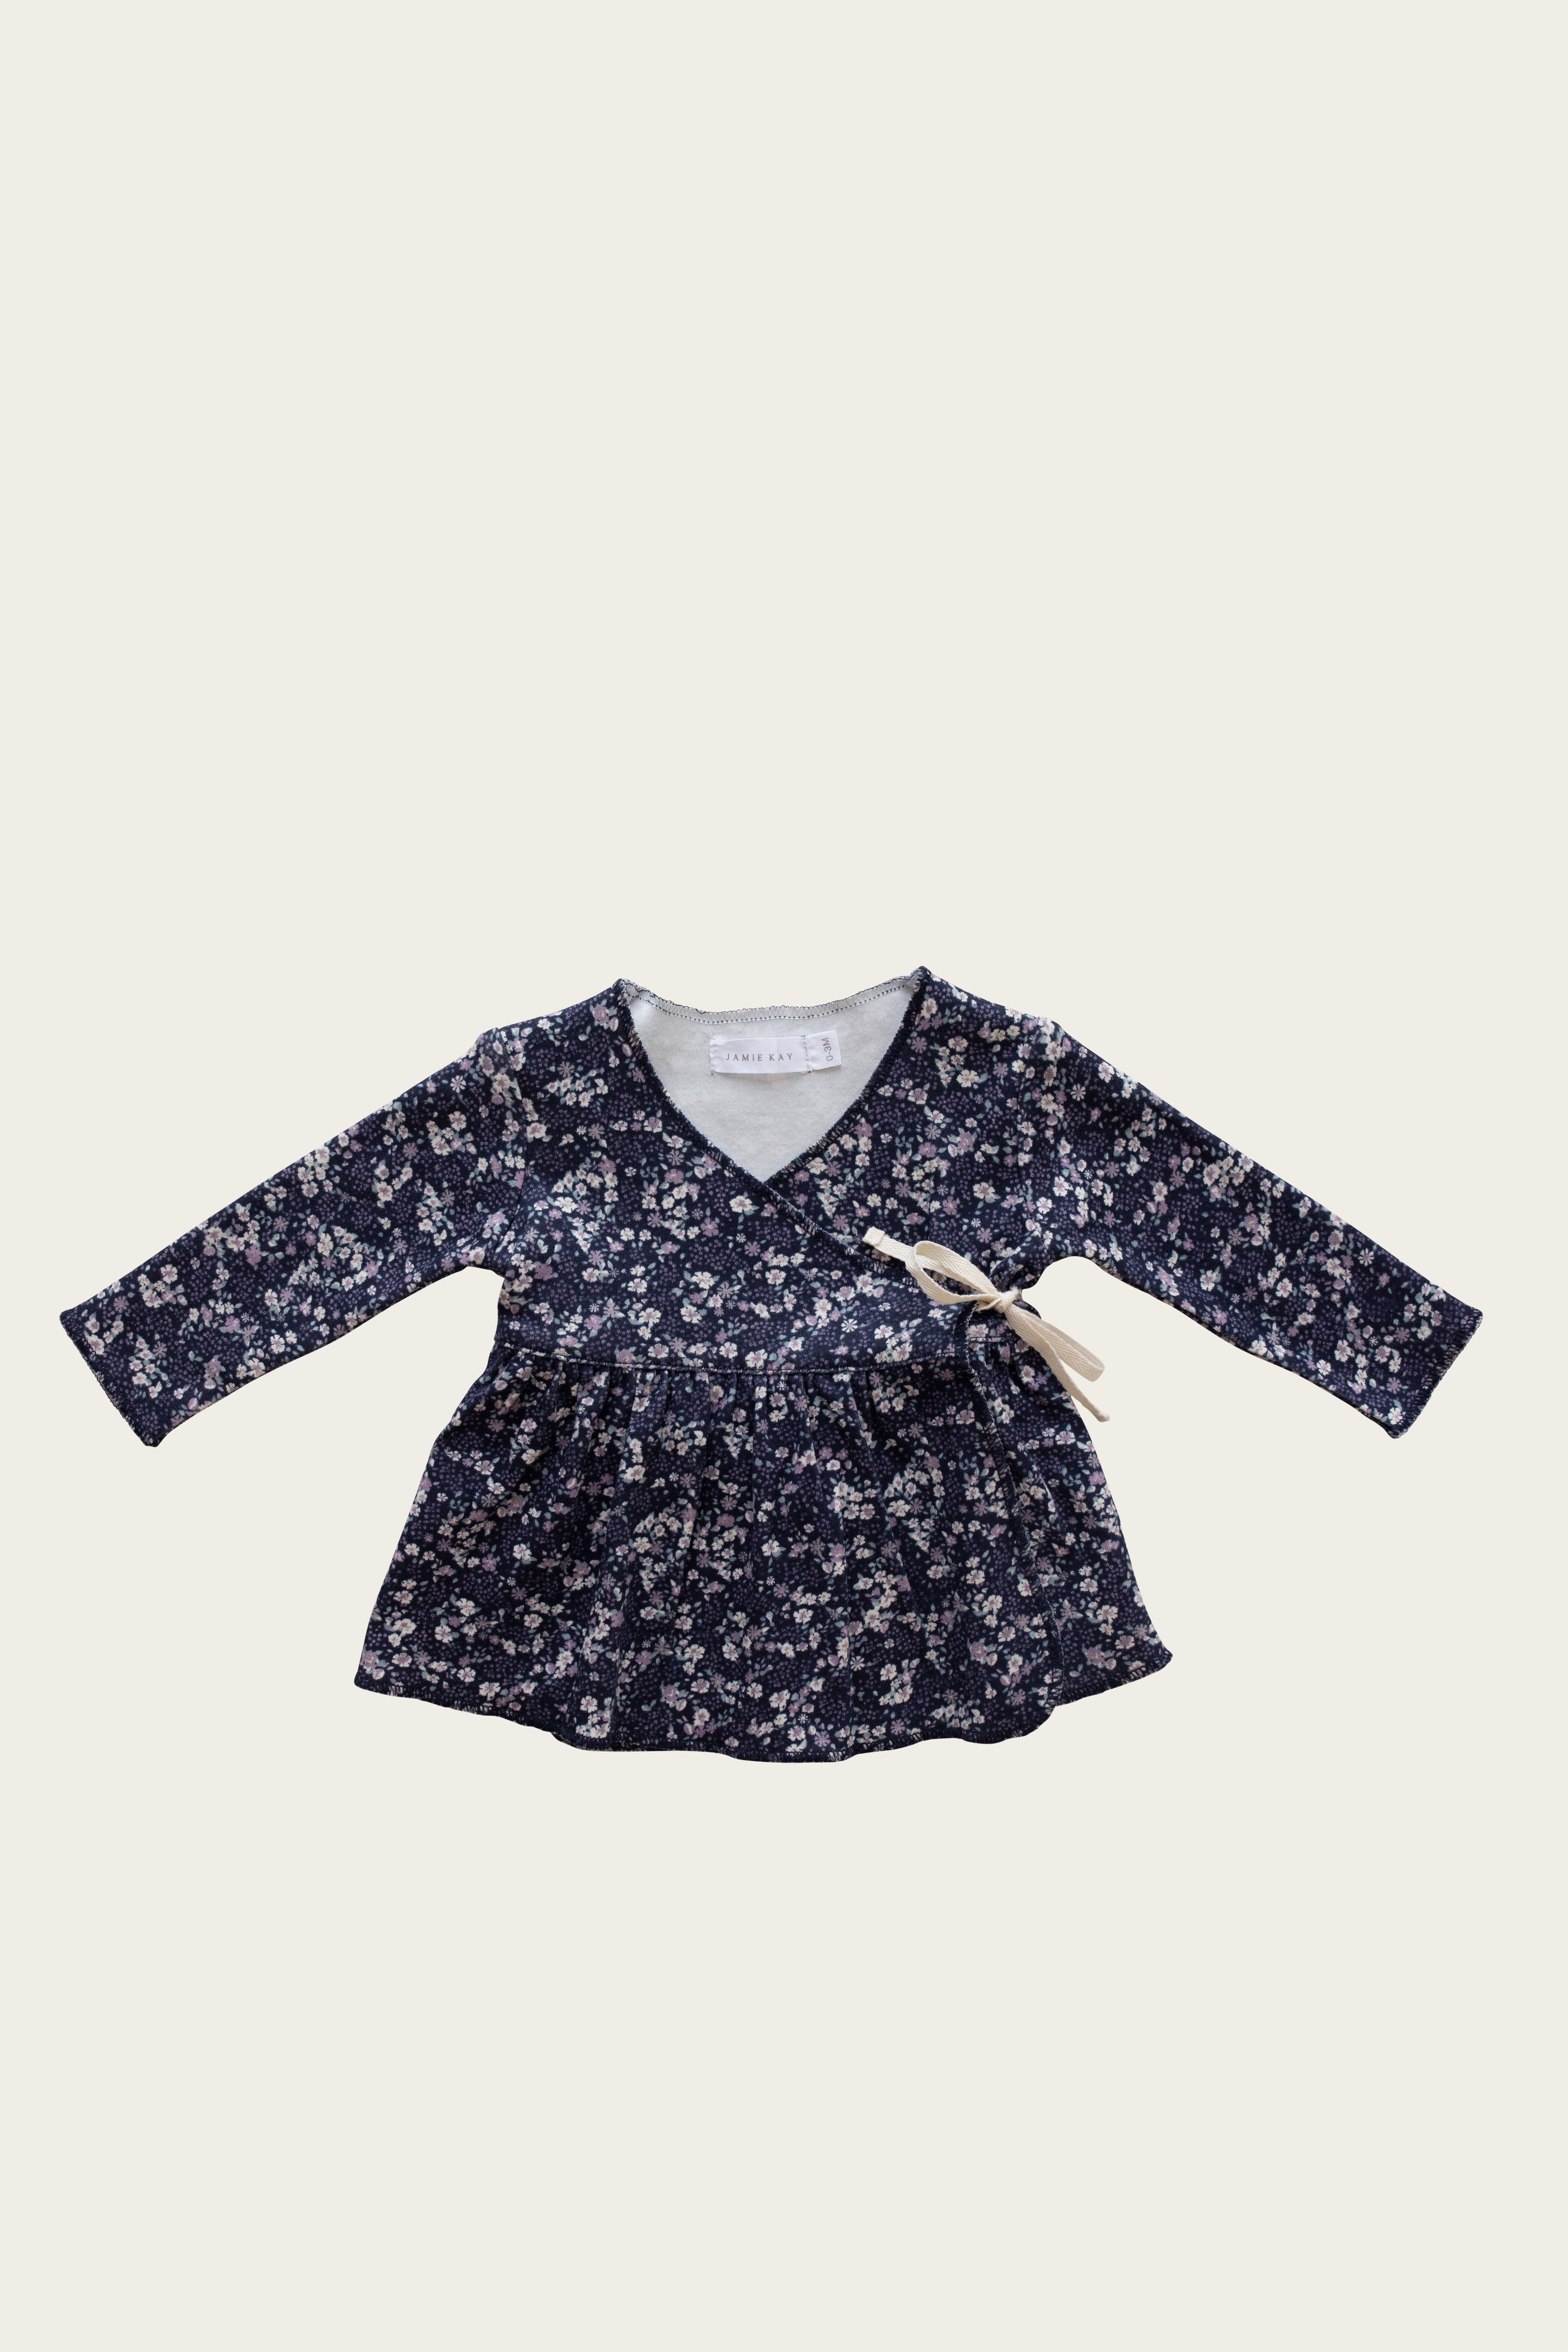 Jamie Kay Organic Cotton | Barn Wrap Chic Top | Floral Boutique Blueberry